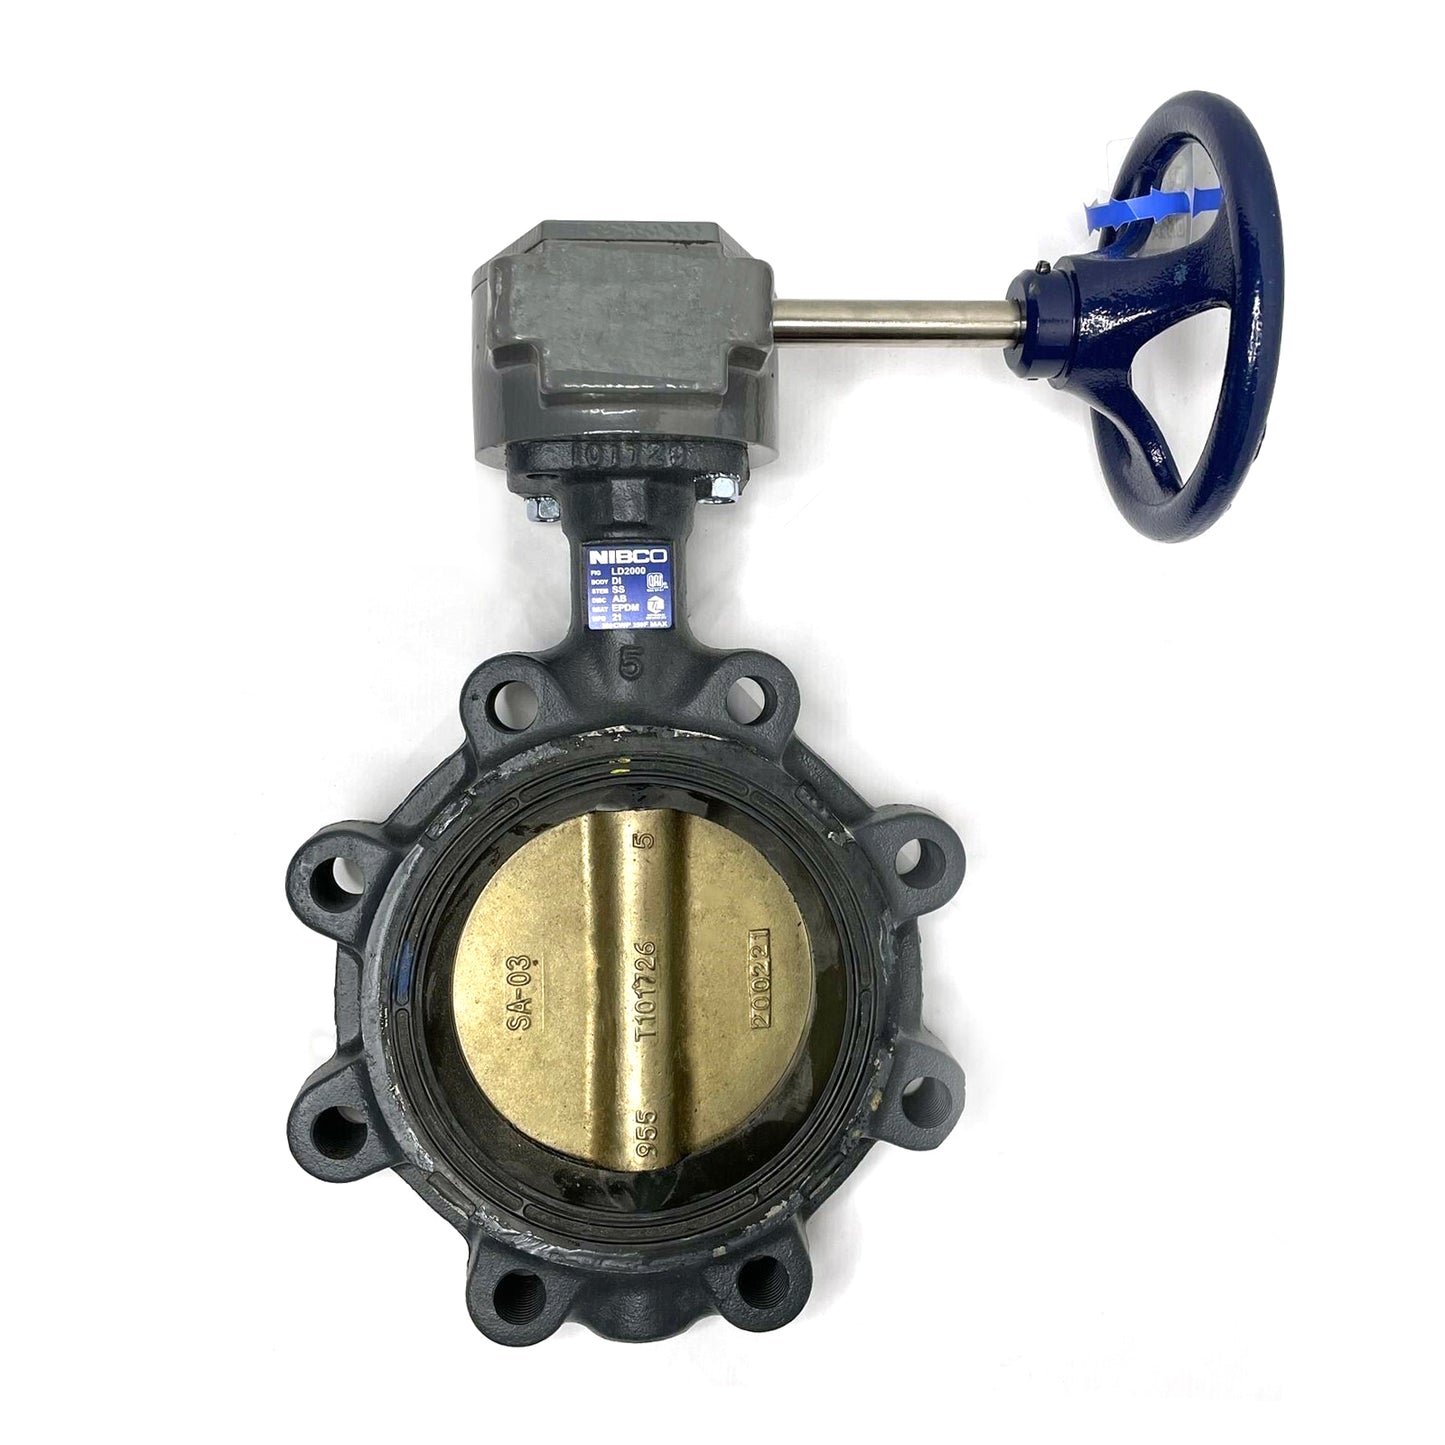 NLG110K - LD-2000 Ductile Iron Lug Type Butterfly Valve - Gear Operator - 6"